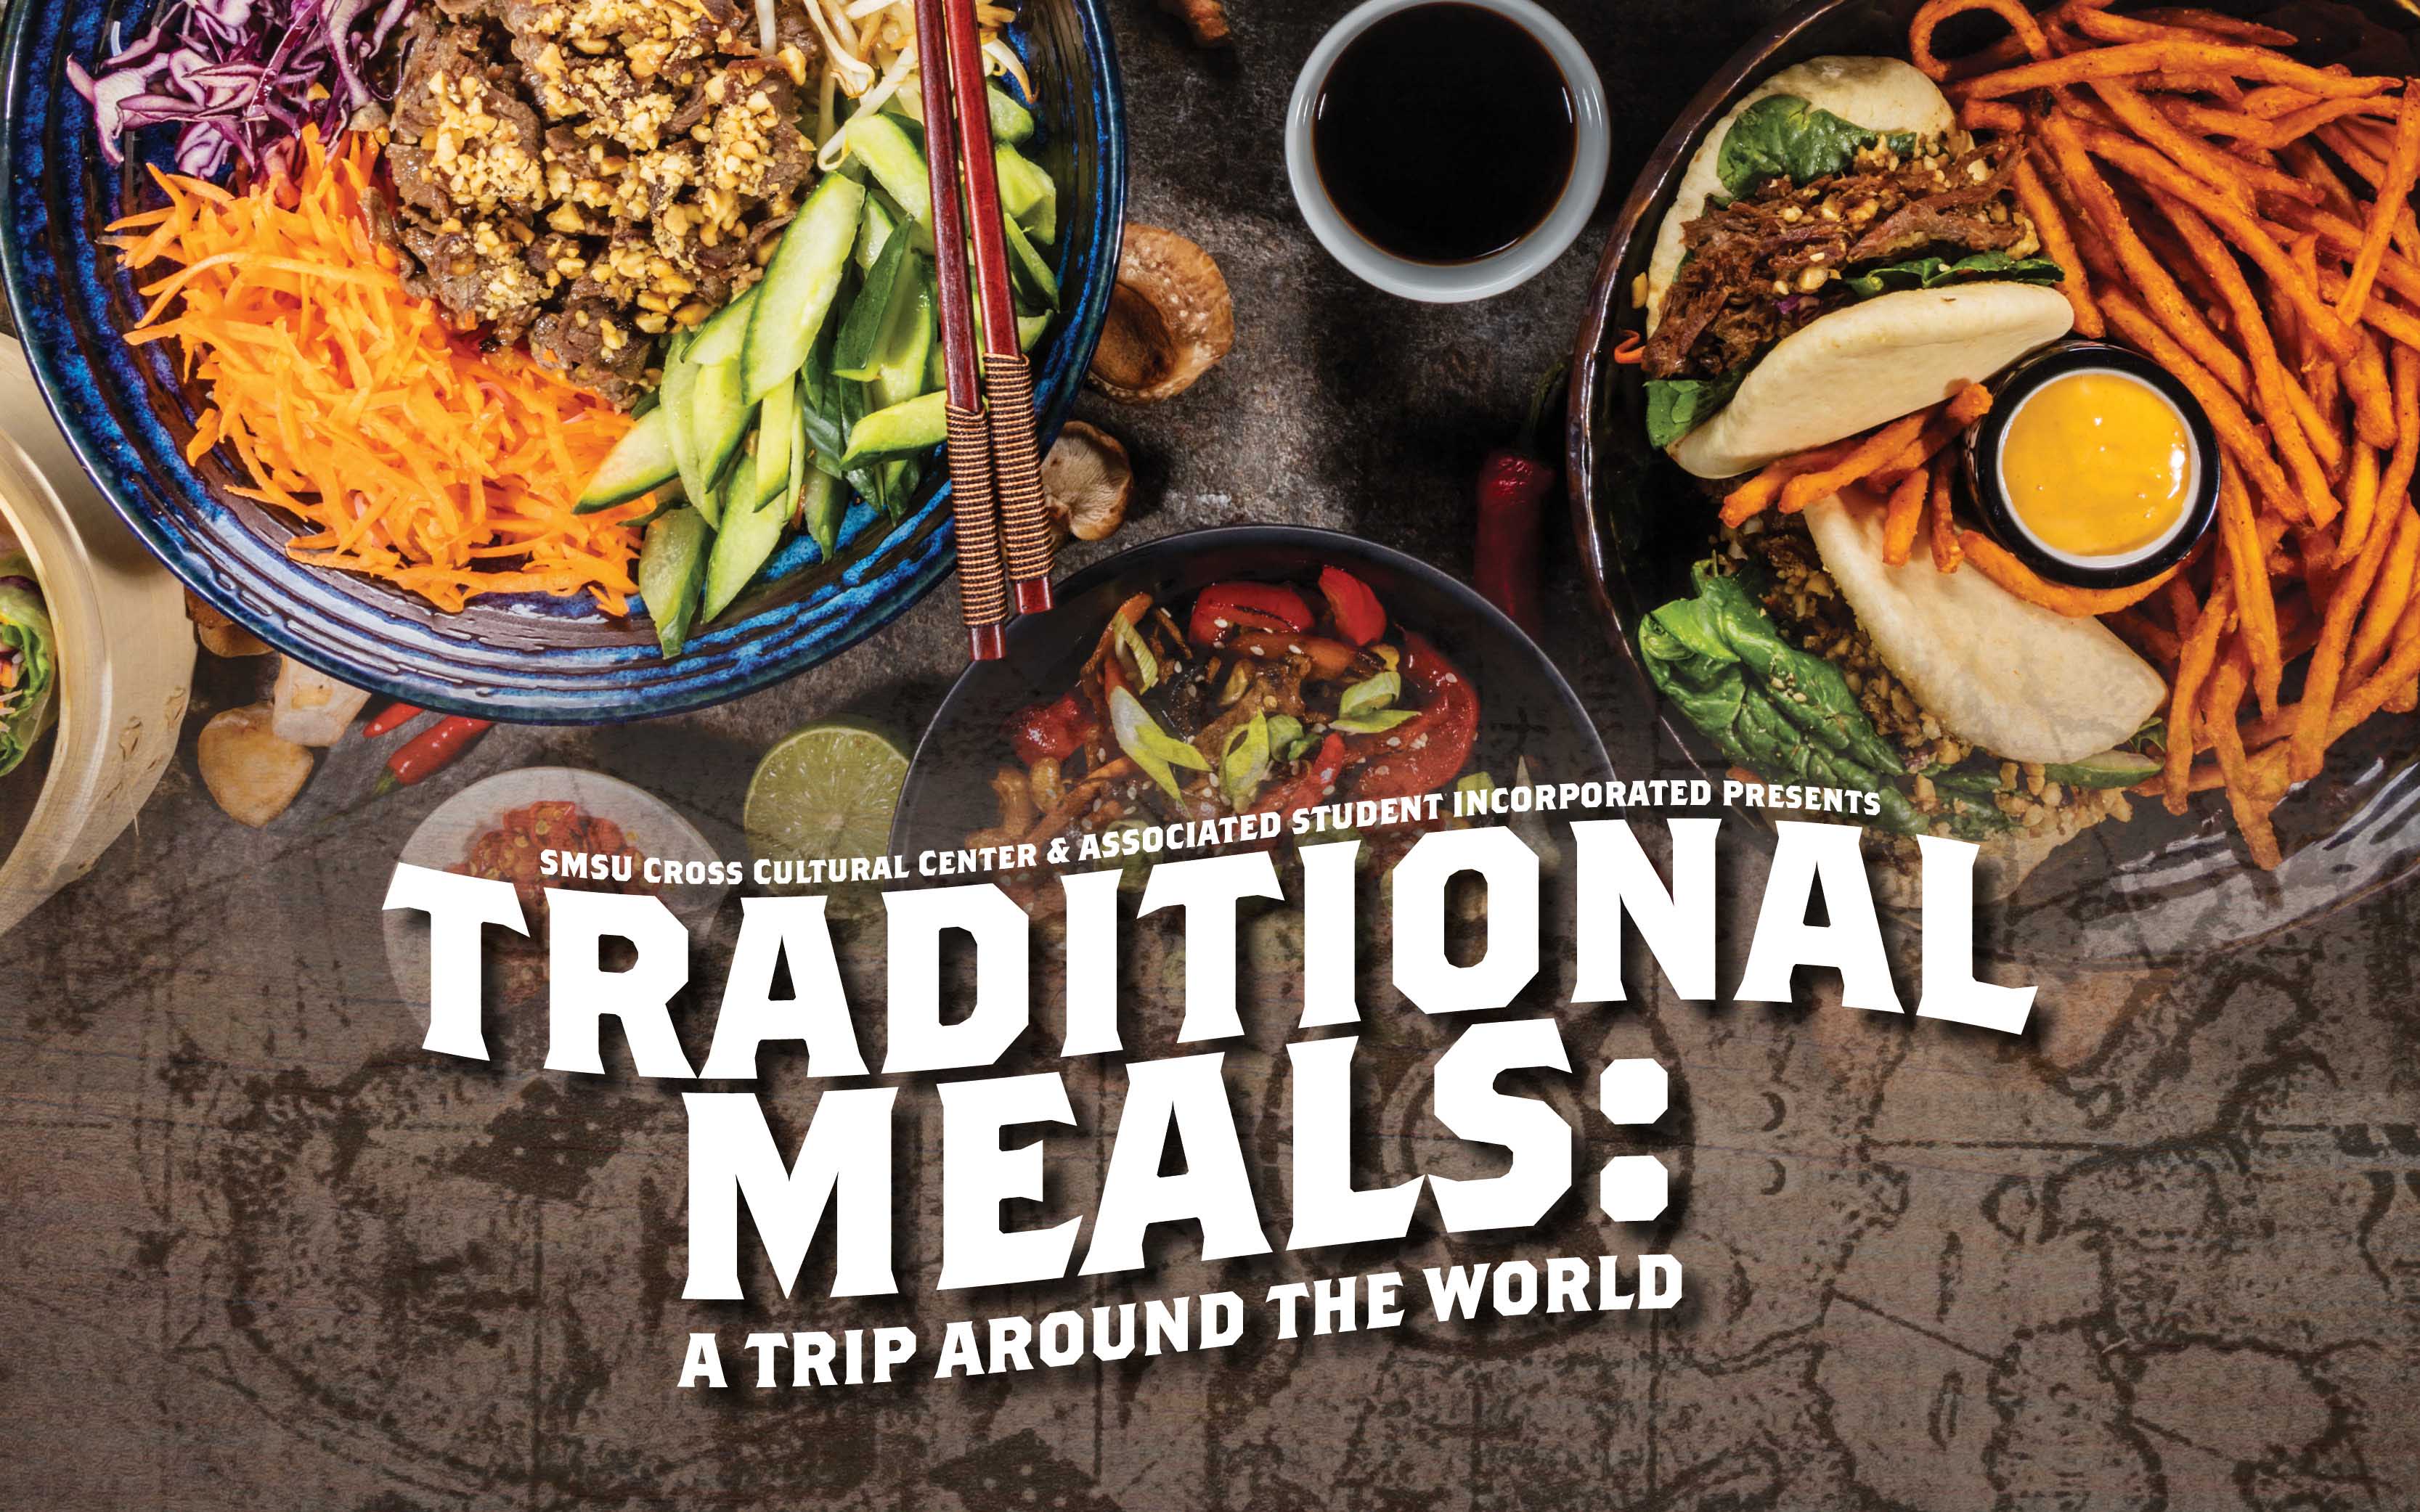 SMSU Cross Cultural Center & Associated Student Incorporated presents Traditional Meals: A Trip Around the World